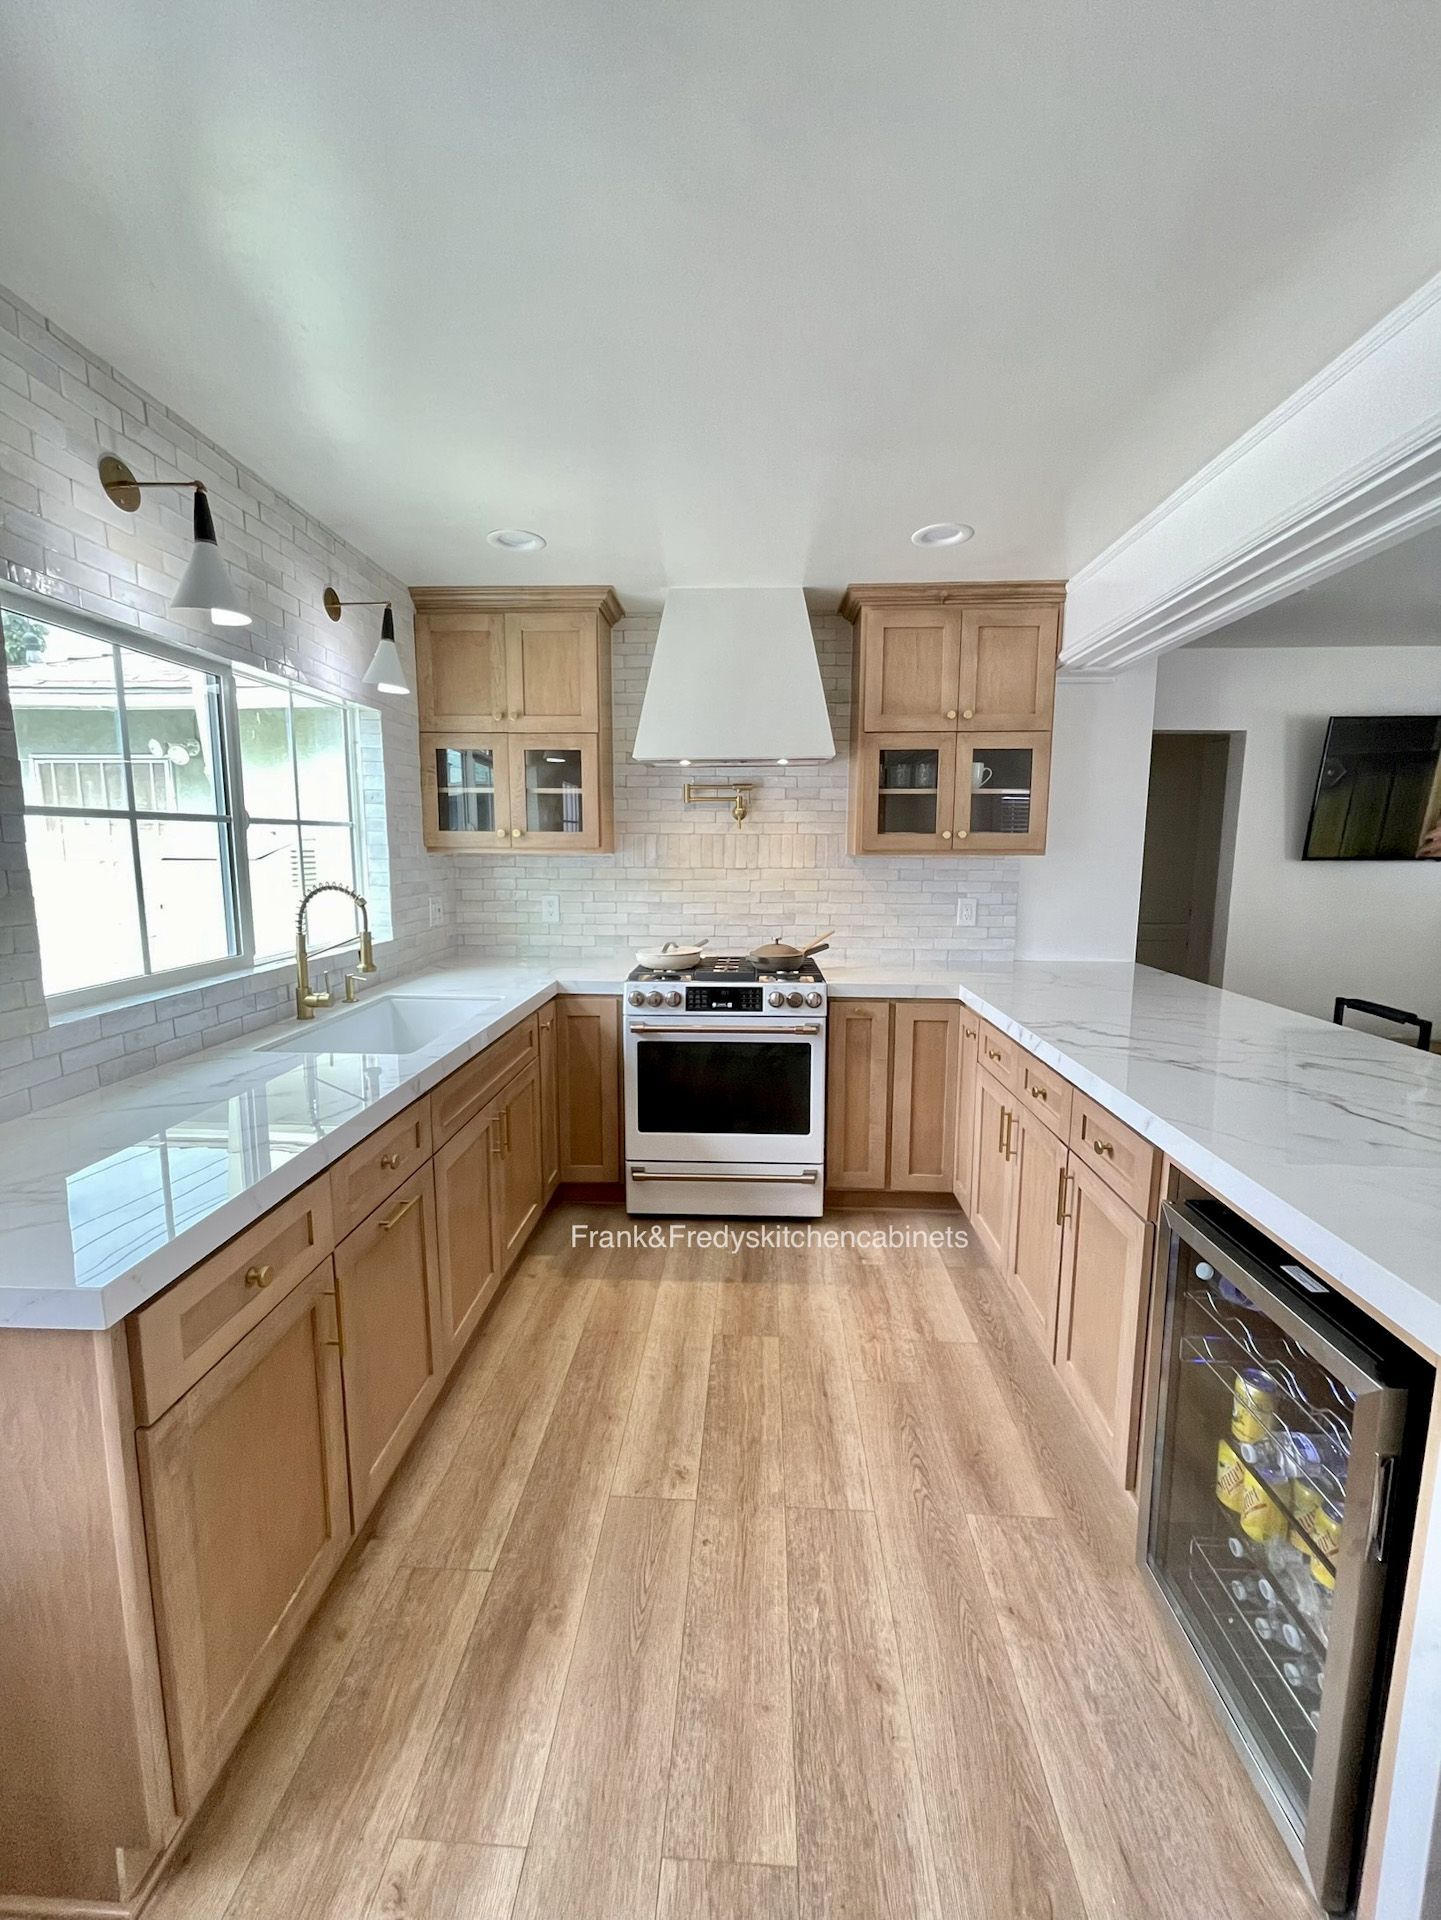 A kitchen with wooden cabinets, white counter tops, a stove and a refrigerator.